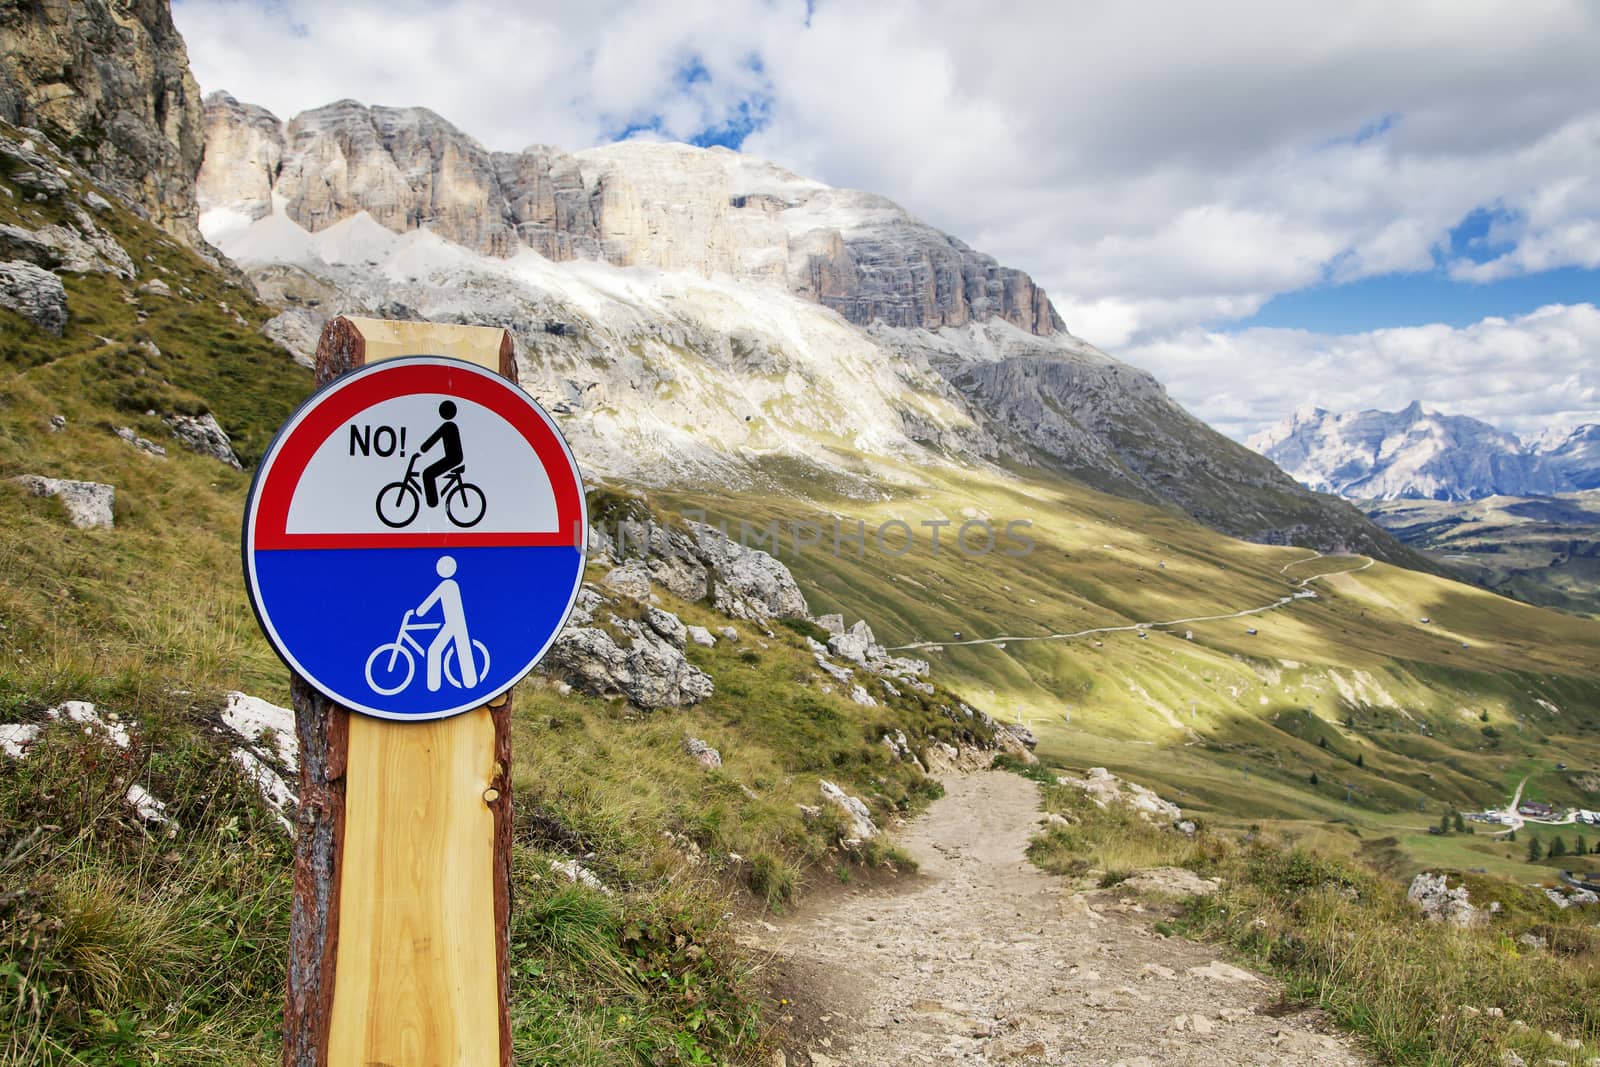 Road sign on a mountain road in Dolomites, Italy